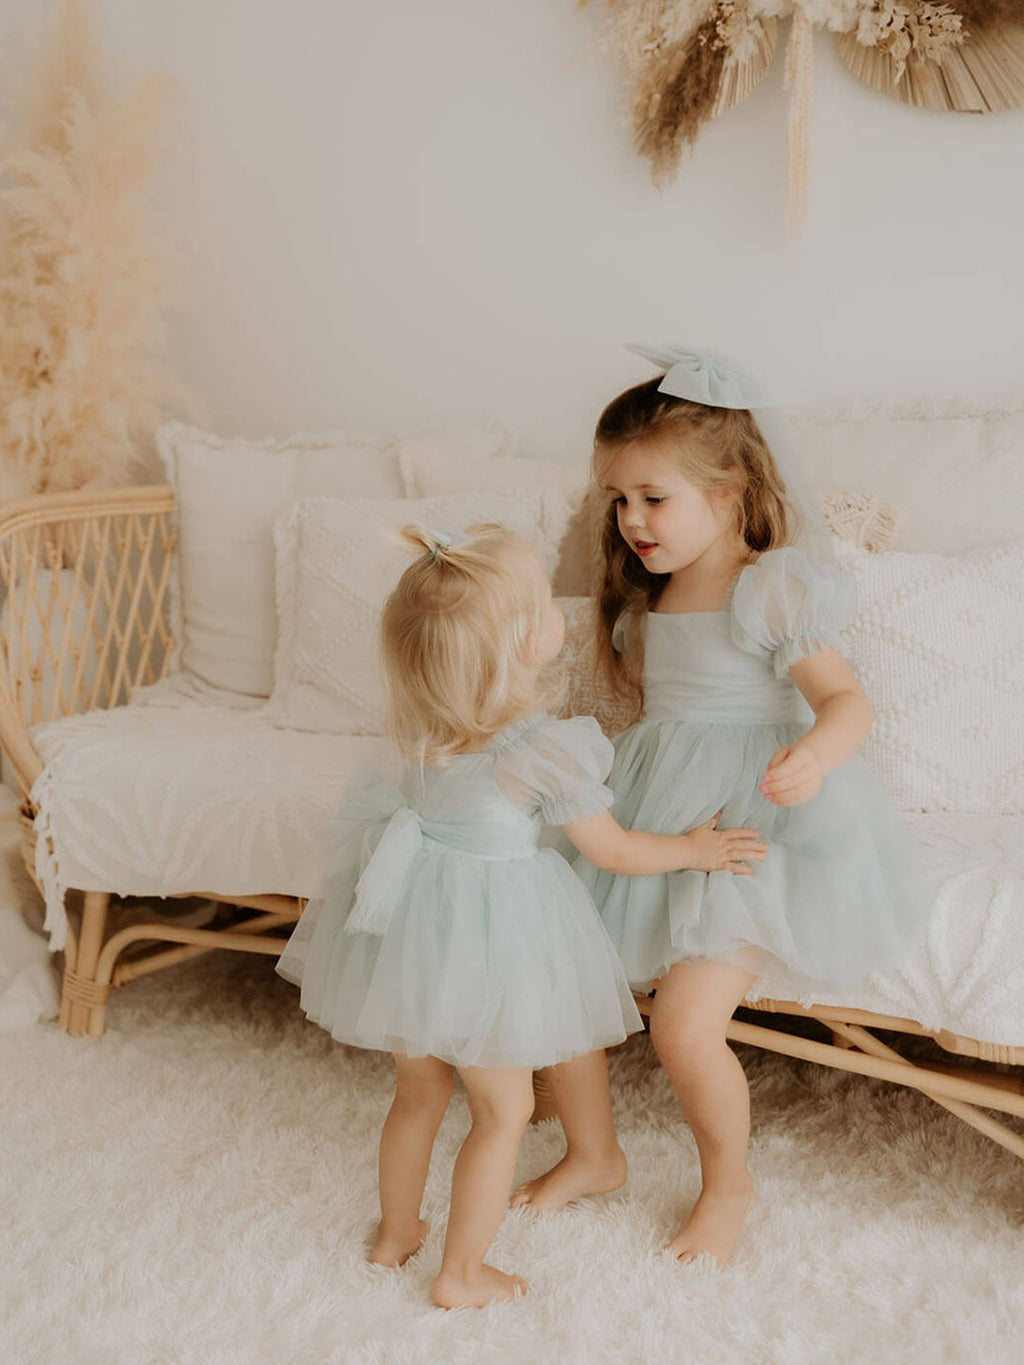 Matching Layla flower girl dresses in dusty blue are worn by two sisters.